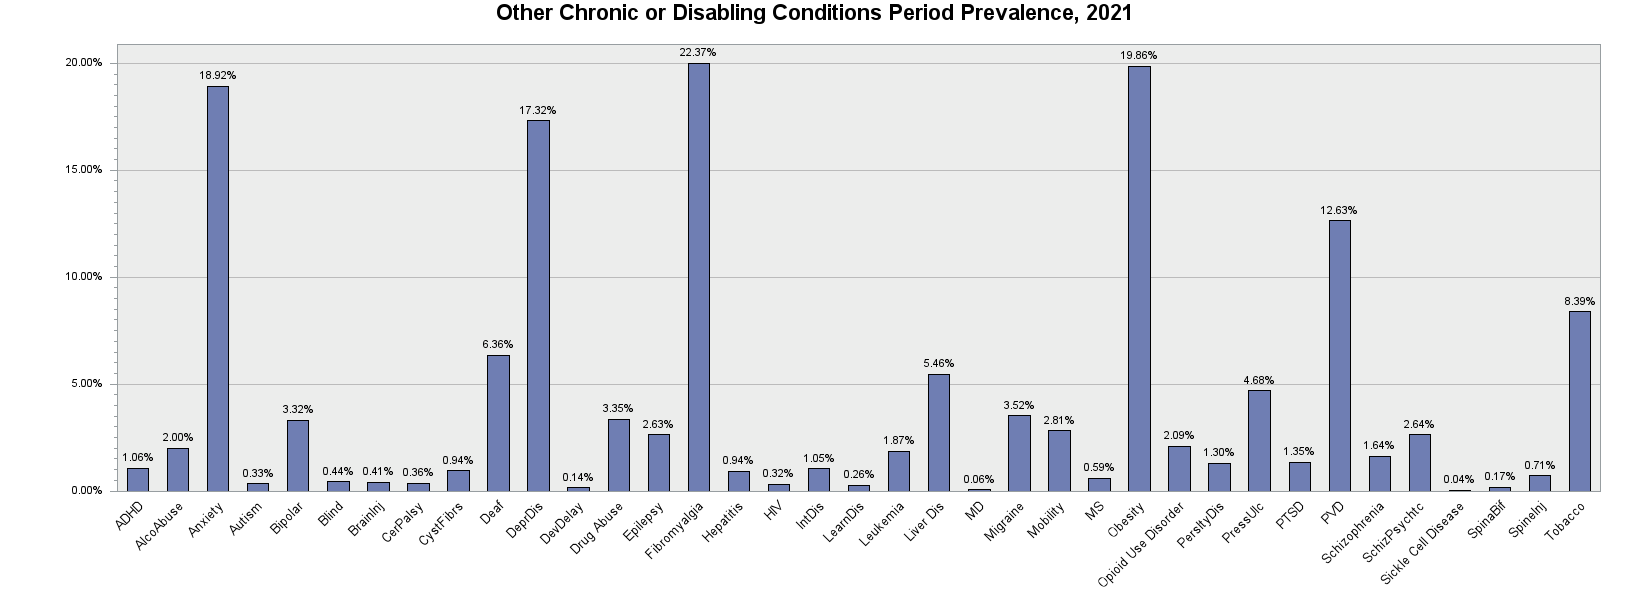 Chart for Other Chronic or Disabling Conditions Period Prevalence, 2019